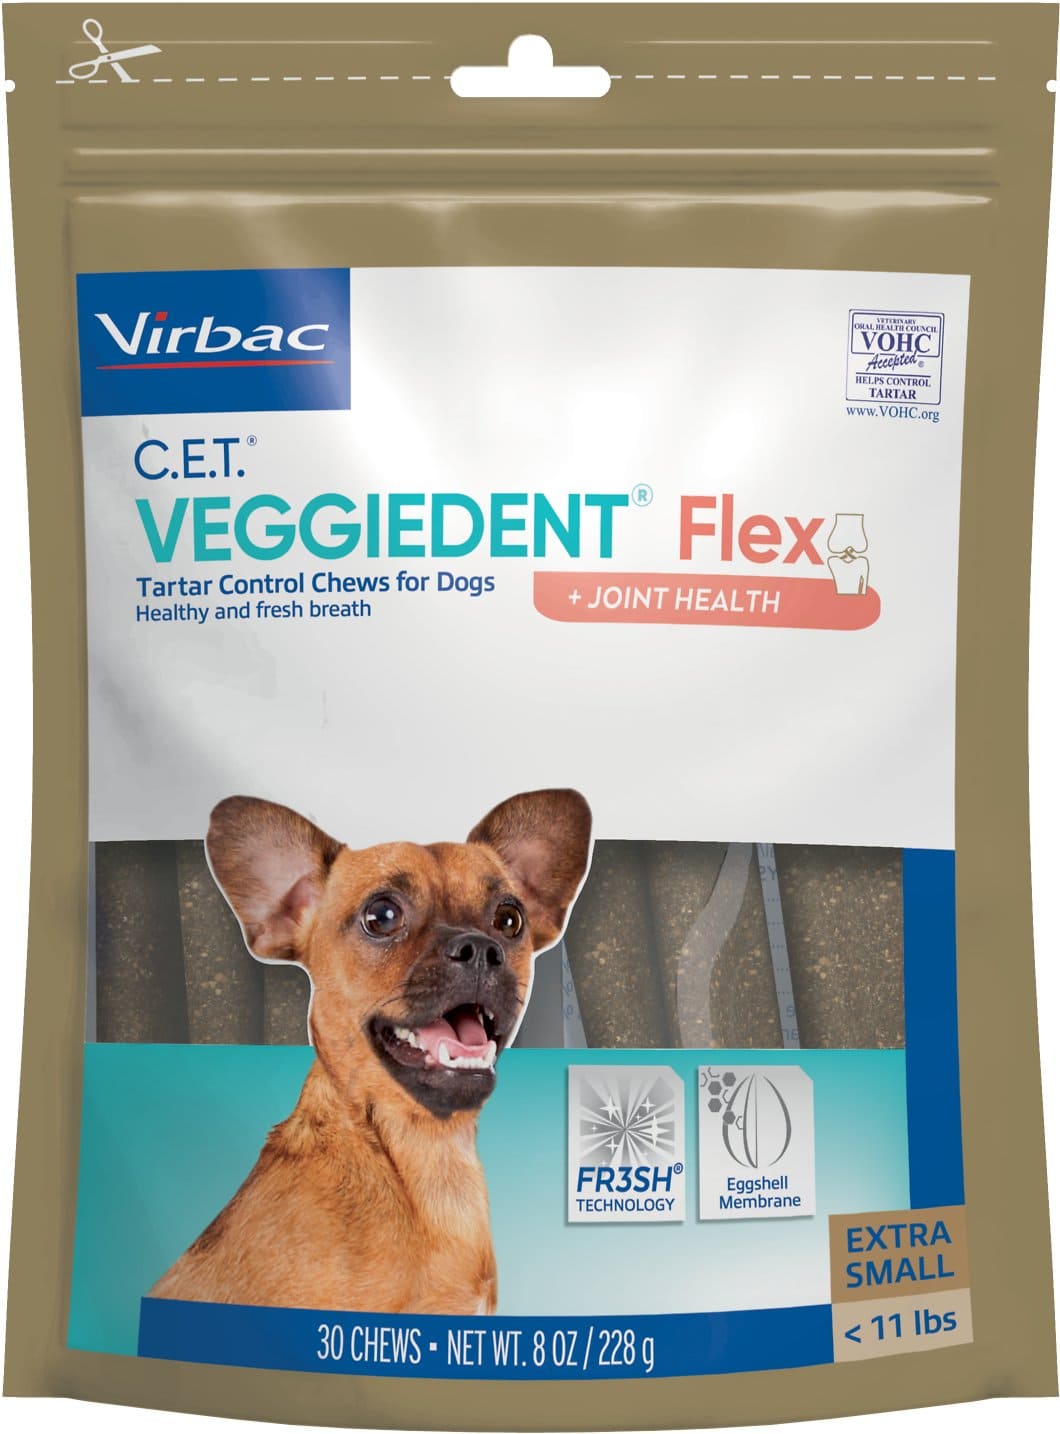 C.E.T. VeggieDent Flex + Joint Health 30 chews for extra small dogs up to 11 lbs 1